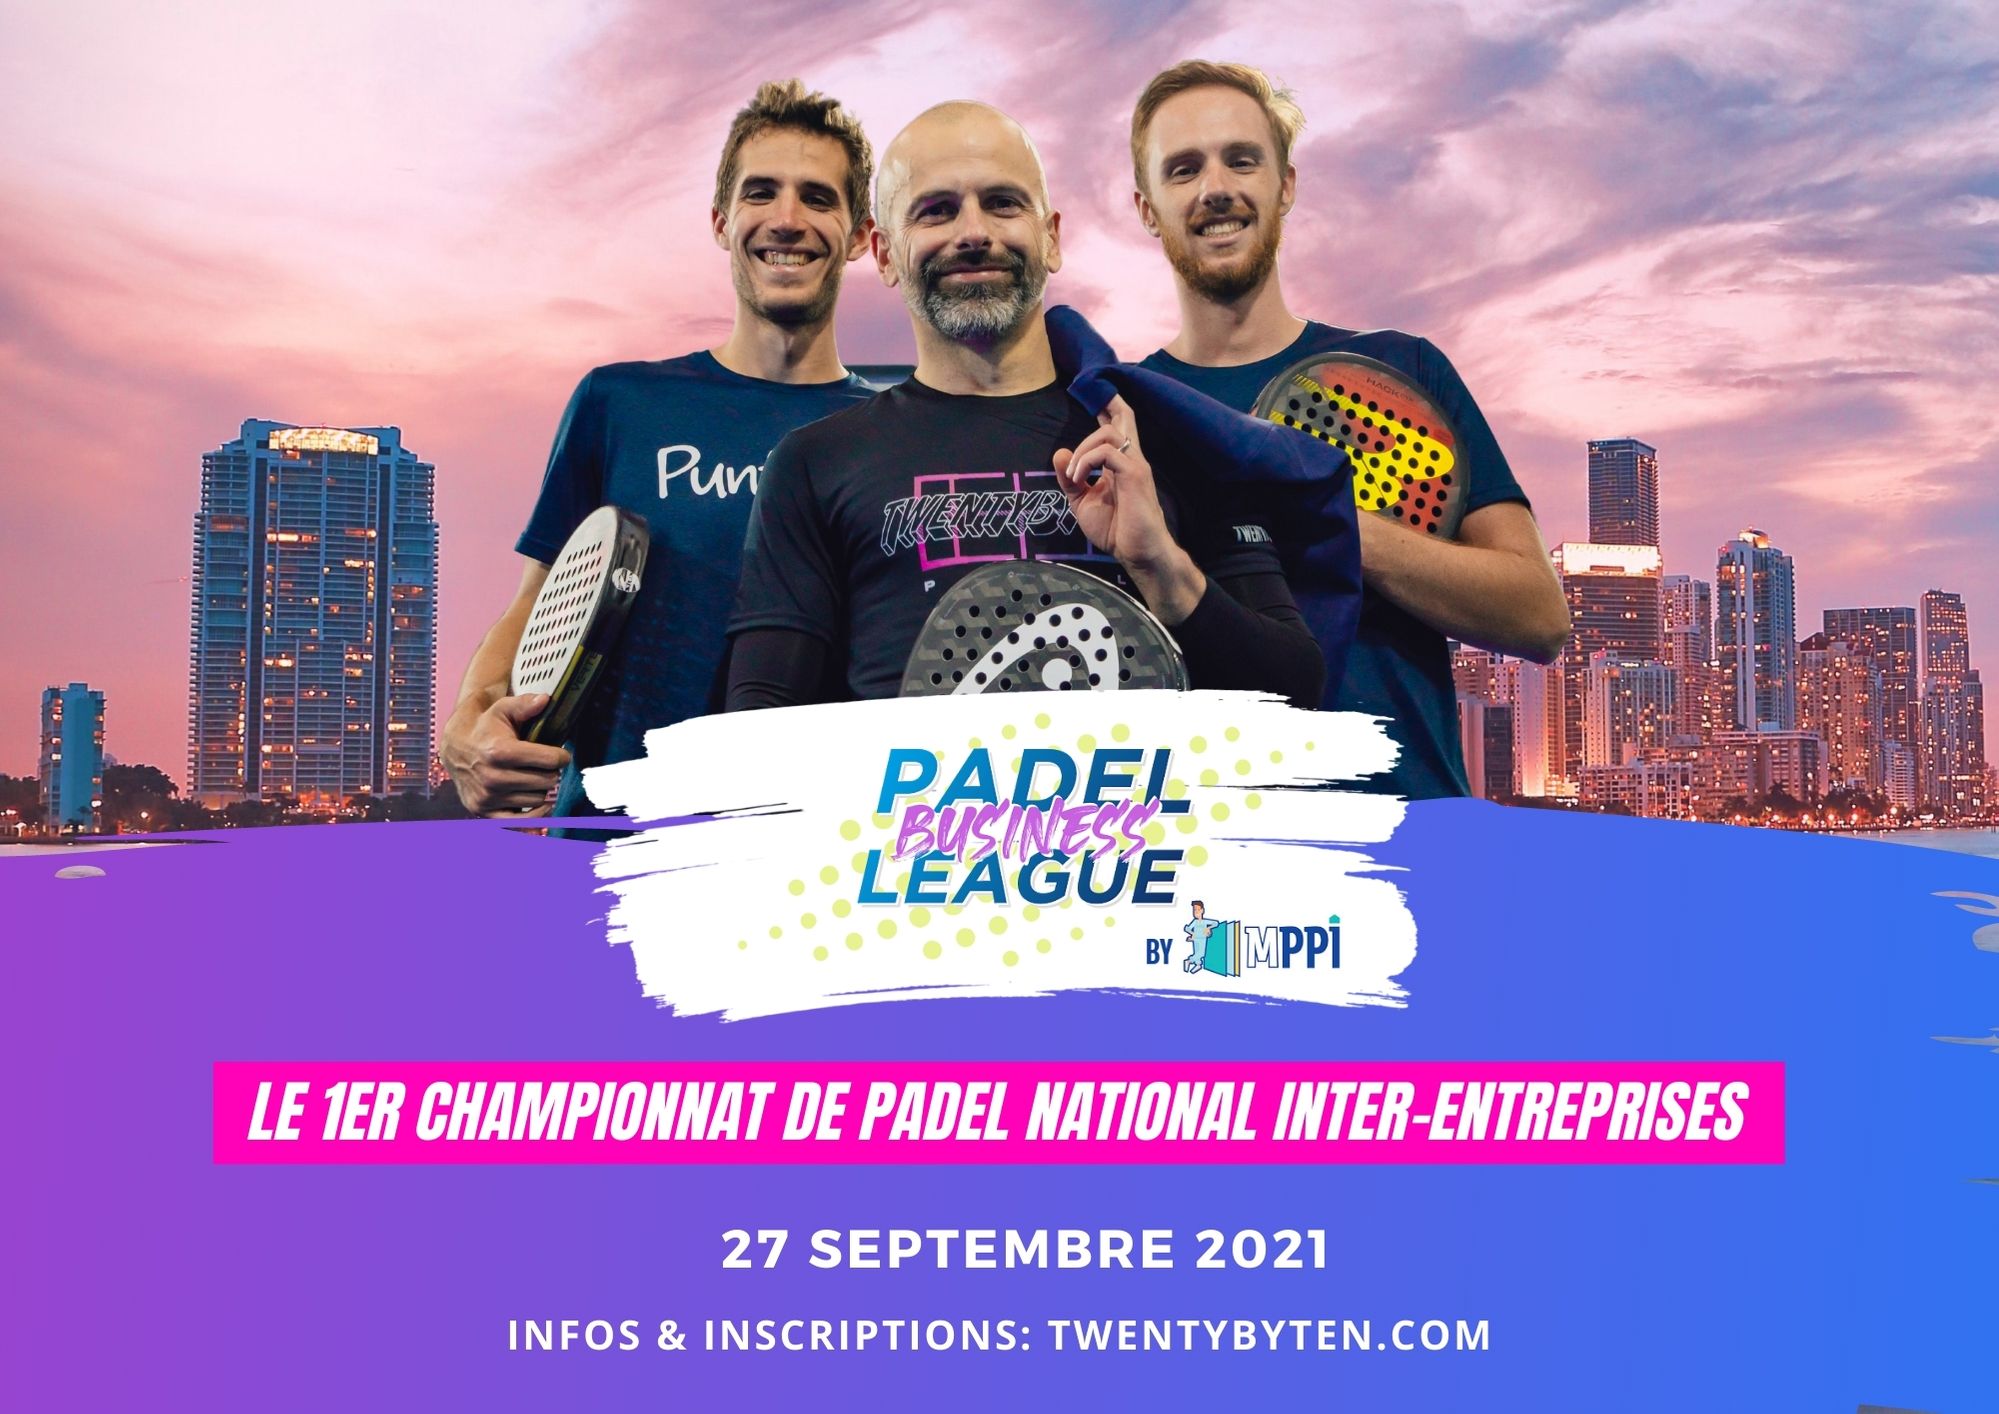 Le Padel in companies: what are you waiting for to get started?